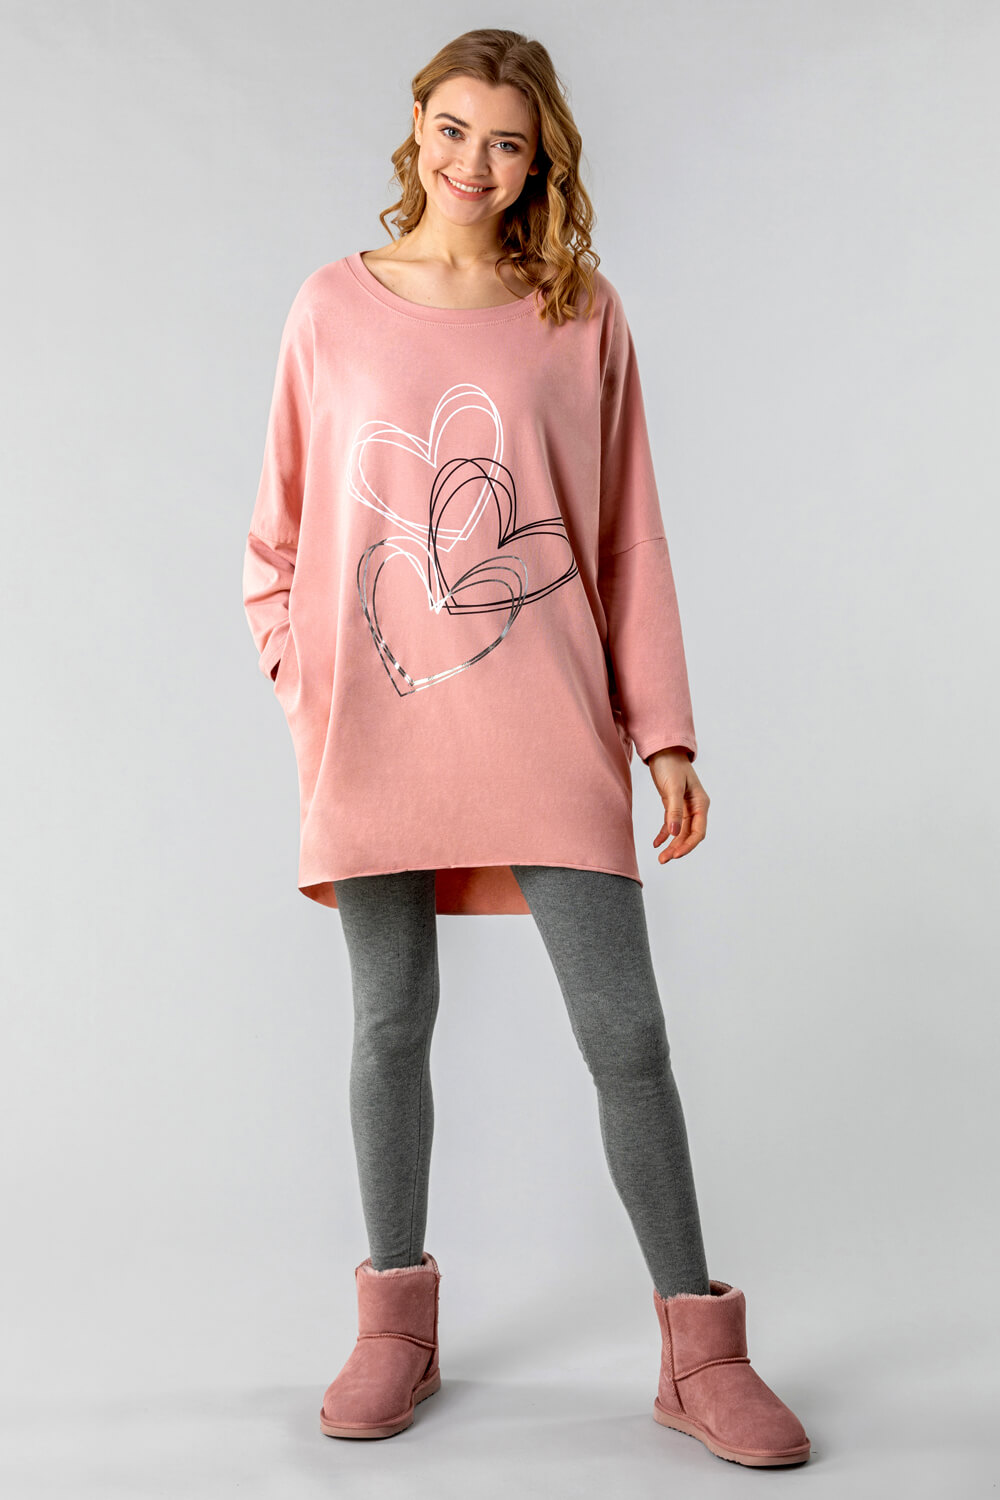 PINK One Size Foil Heart Print Lounge Top, Image 2 of 3